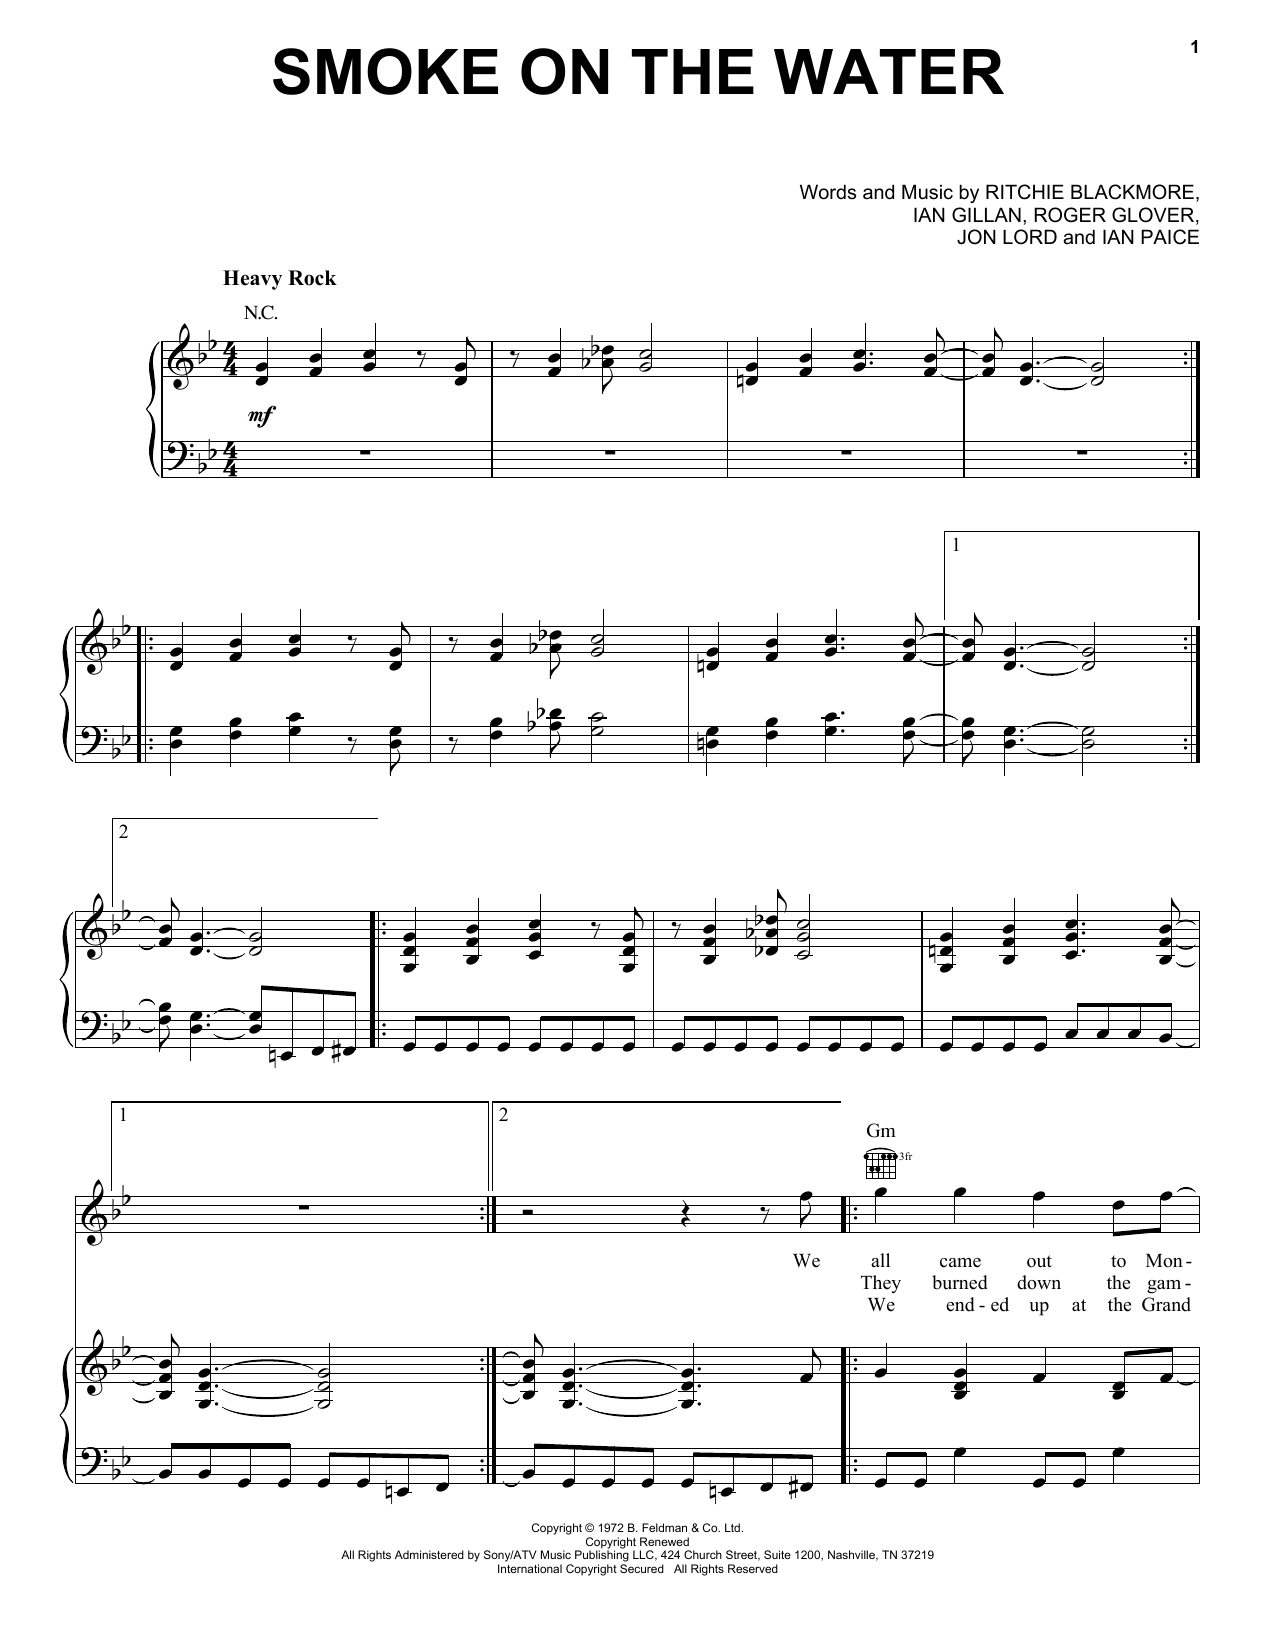 Deep Purple Smoke On The Water sheet music notes and chords. Download Printable PDF.